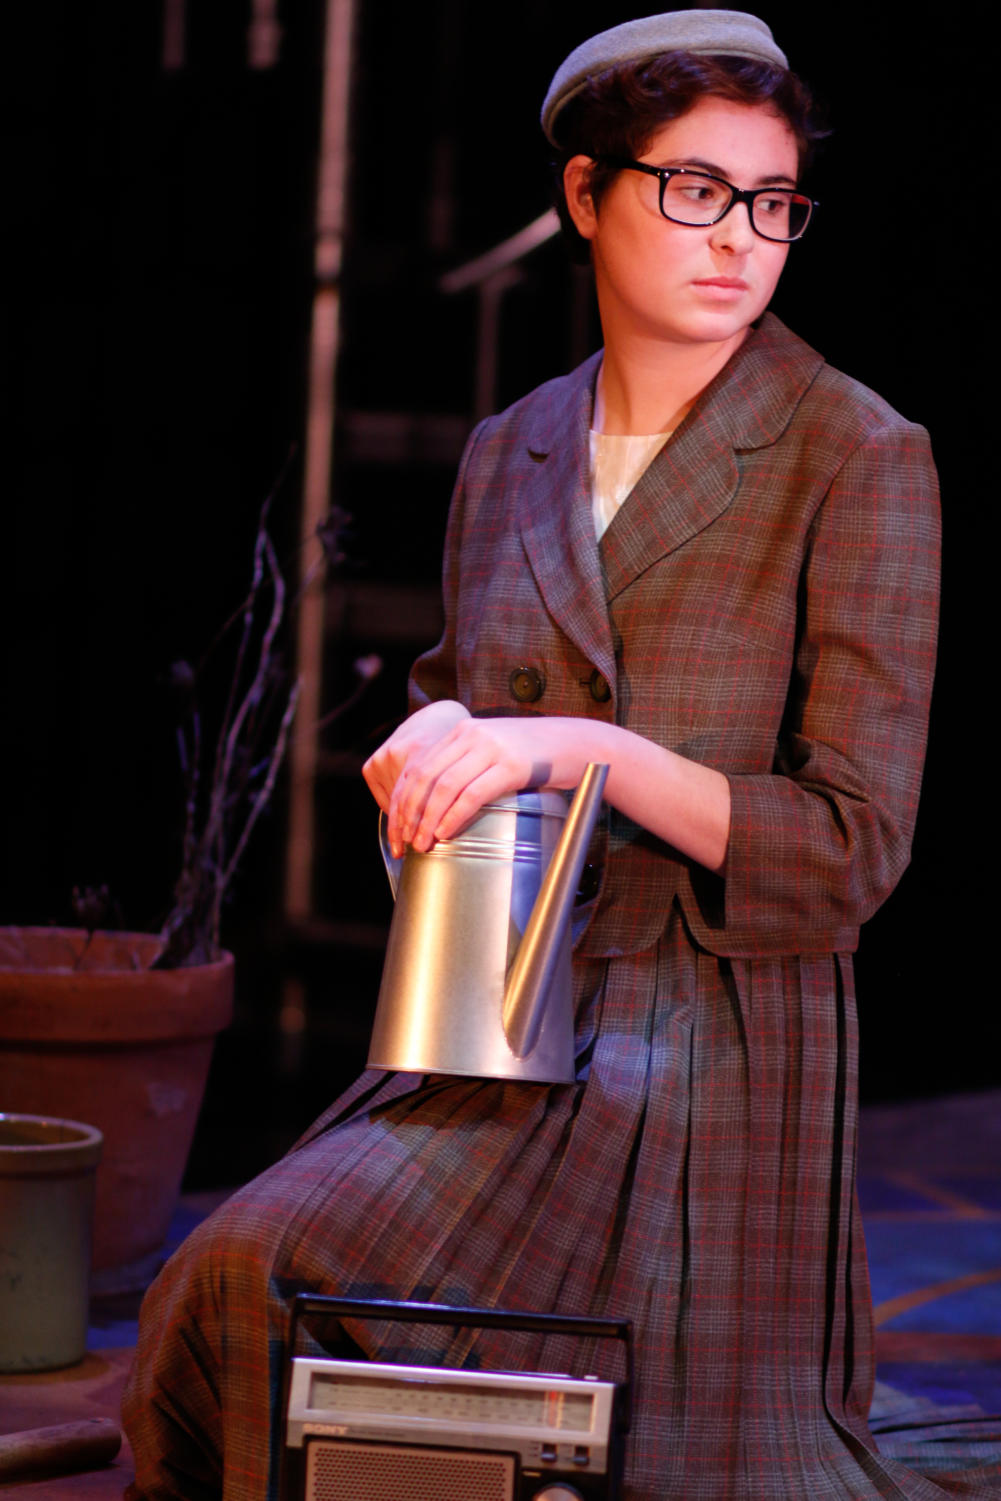 Electra's sister Chrysothemis (played by first-year Katie Bevil) considers her role in the family drama.